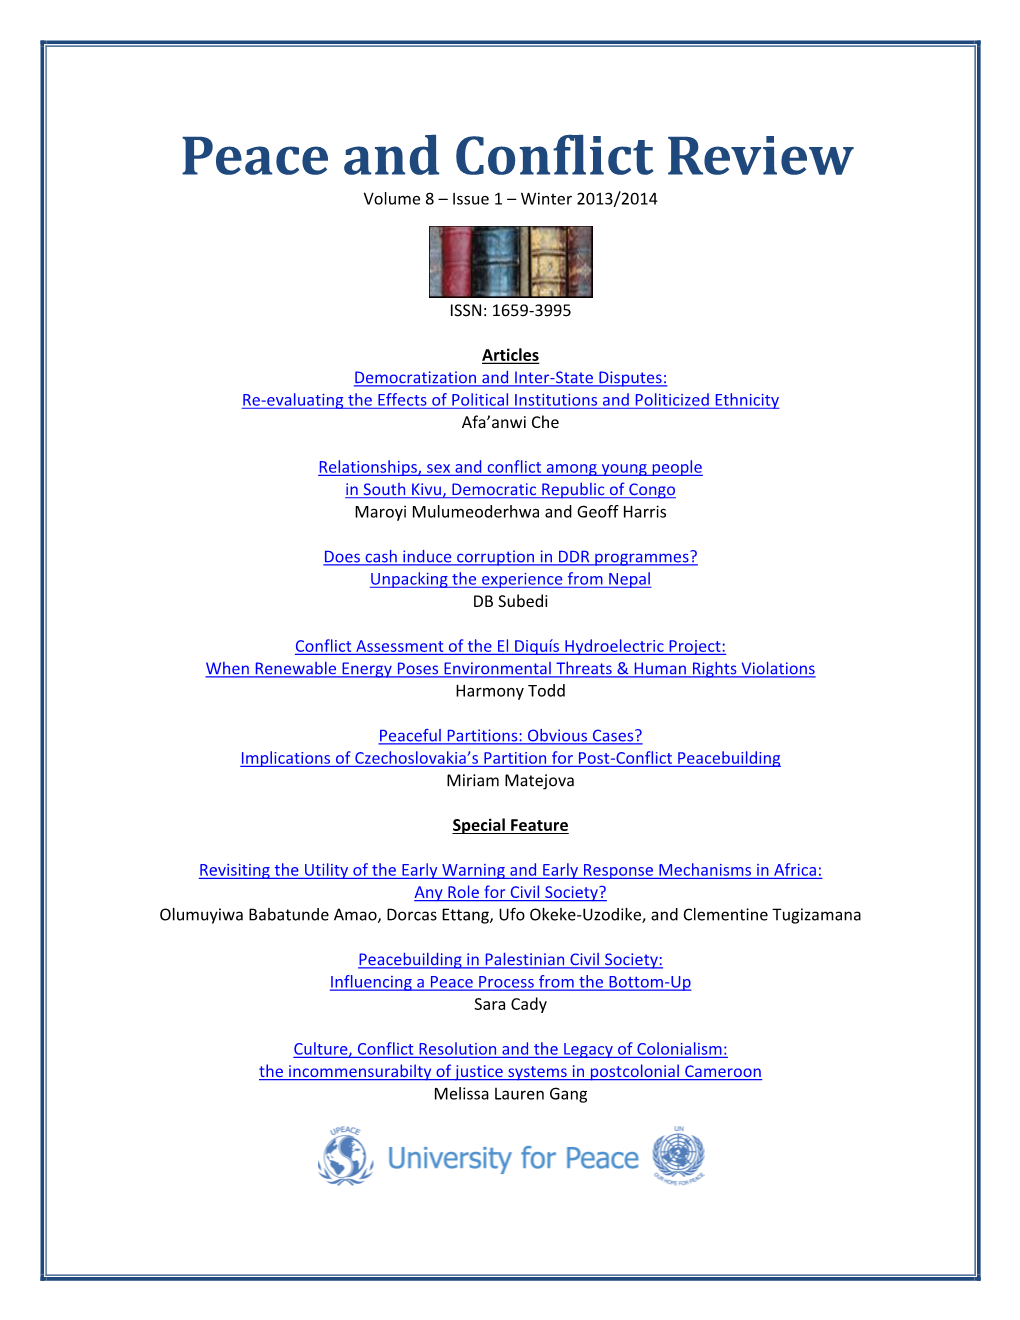 Peace and Conflict Review Volume 8 – Issue 1 – Winter 2013/2014